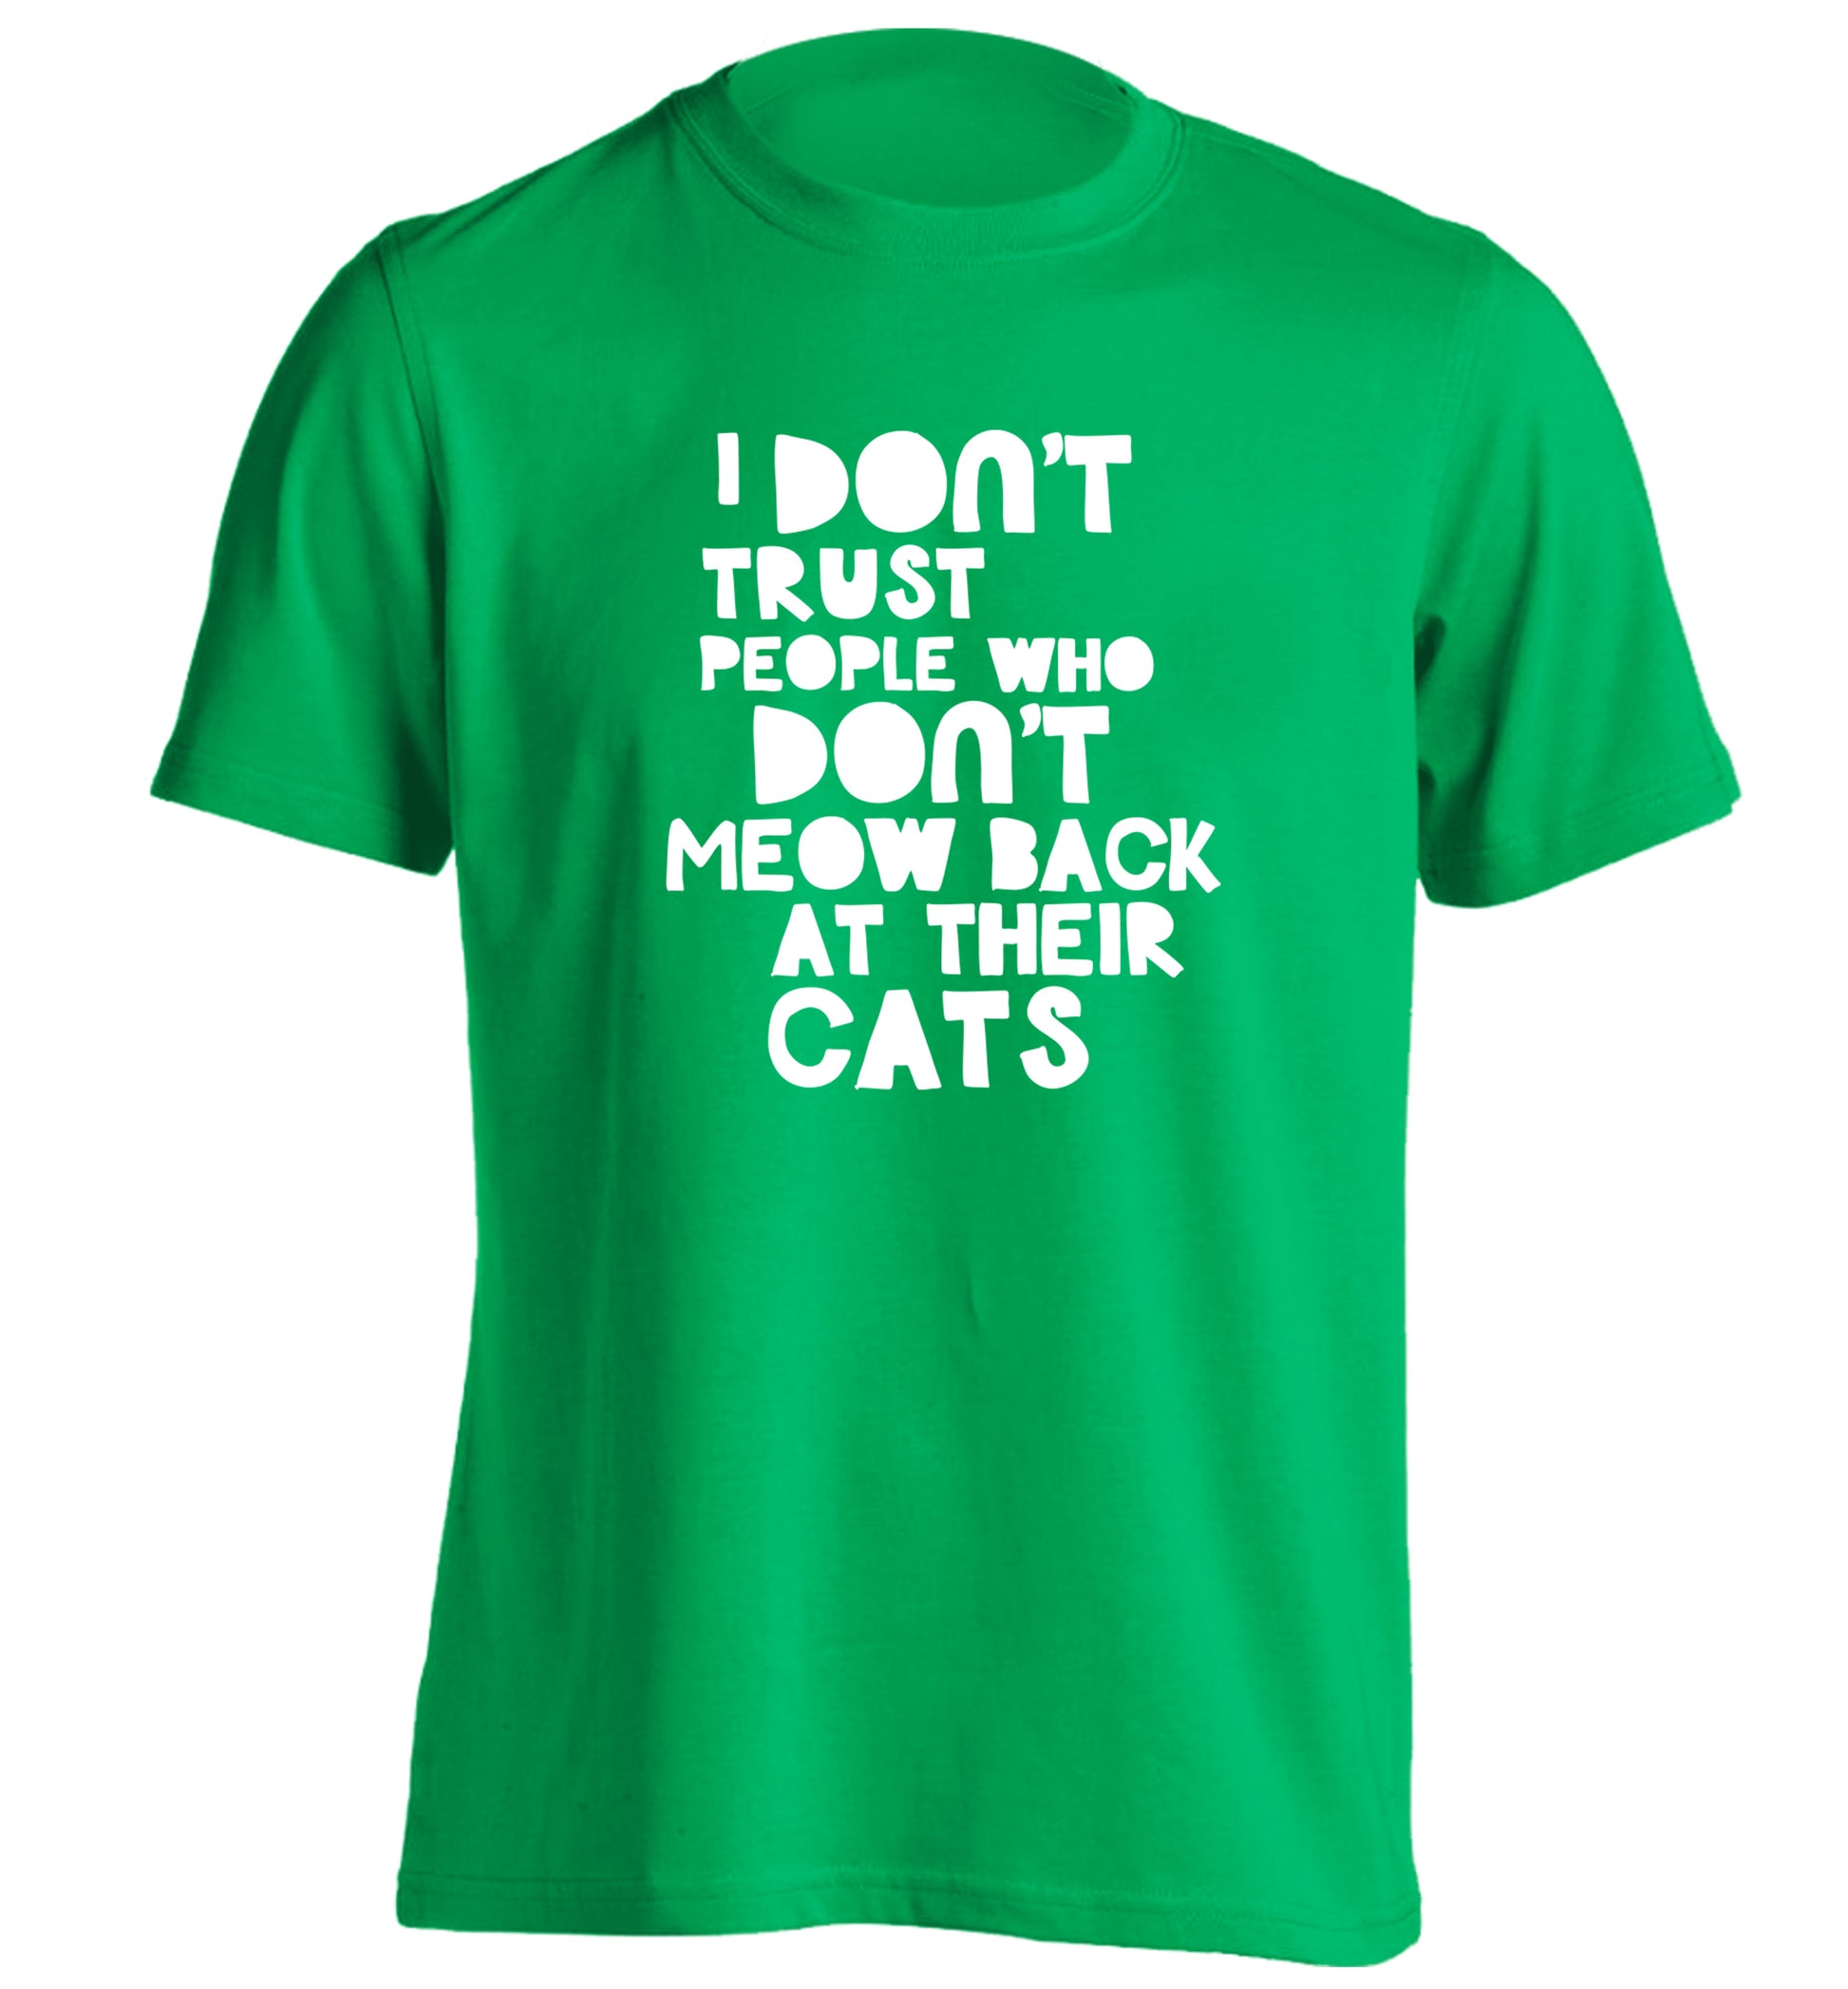 I don't trust people who don't meow back at their cats adults unisex green Tshirt 2XL